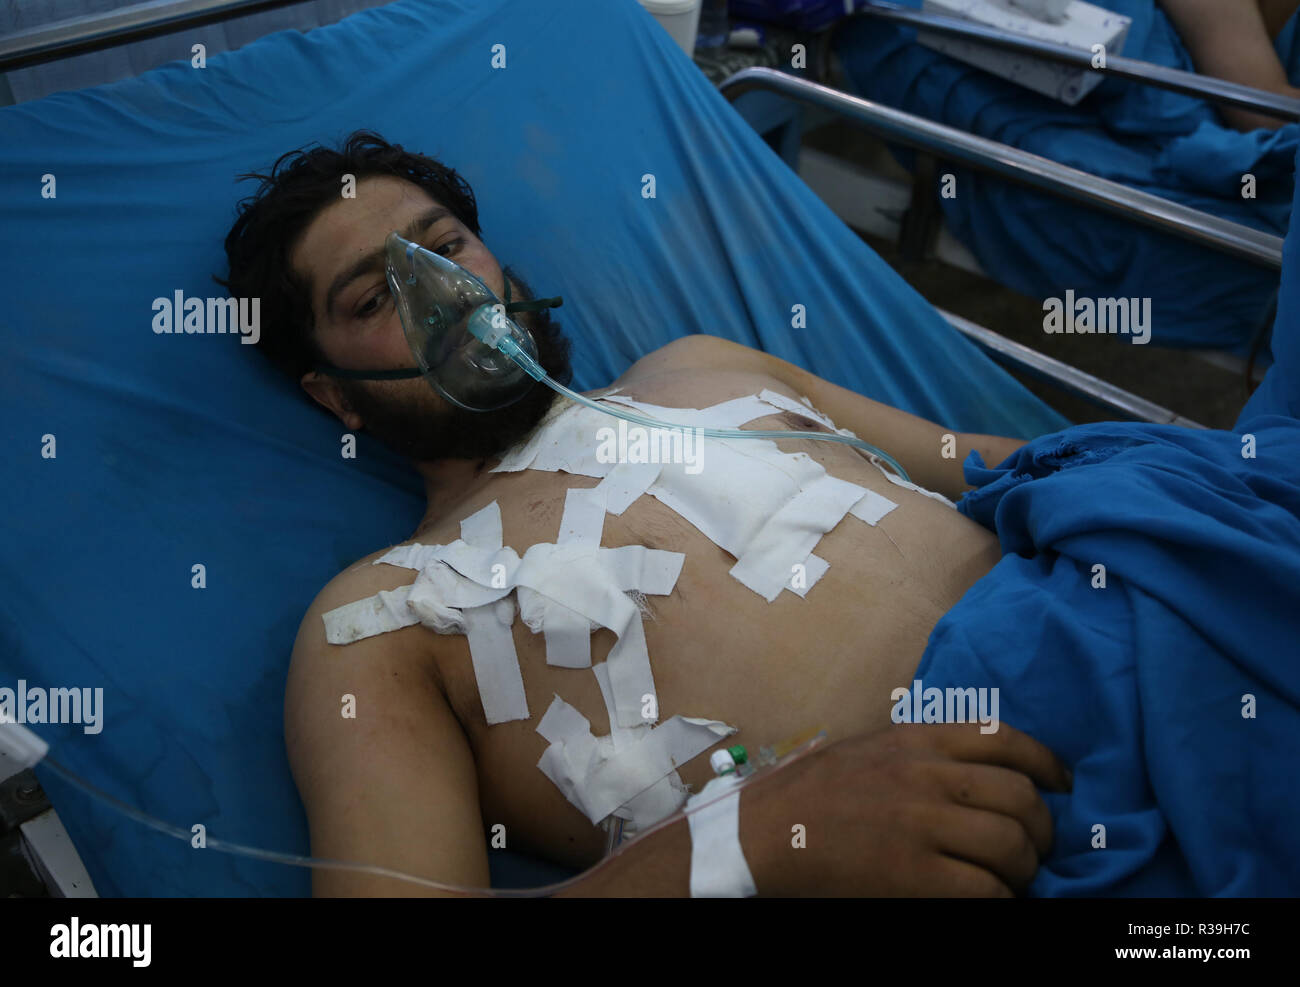 Kabul, Afghanistan. 22nd Nov, 2018. An injured man receives medical treatment at Wazir Akbar Khan hospital in Kabul, Afghanistan, Nov. 22, 2018. On Tuesday evening, a suicide bomber detonated his explosive belt at a wedding hall where scores of religious scholars and ordinary people were celebrating the birthday of Muslims Prophet Mohammad, killing over 60 and injuring more than 90 others, according to latest figures by the country's Ministry of Public Health. Credit: Rahmat Alizadah/Xinhua/Alamy Live News Stock Photo